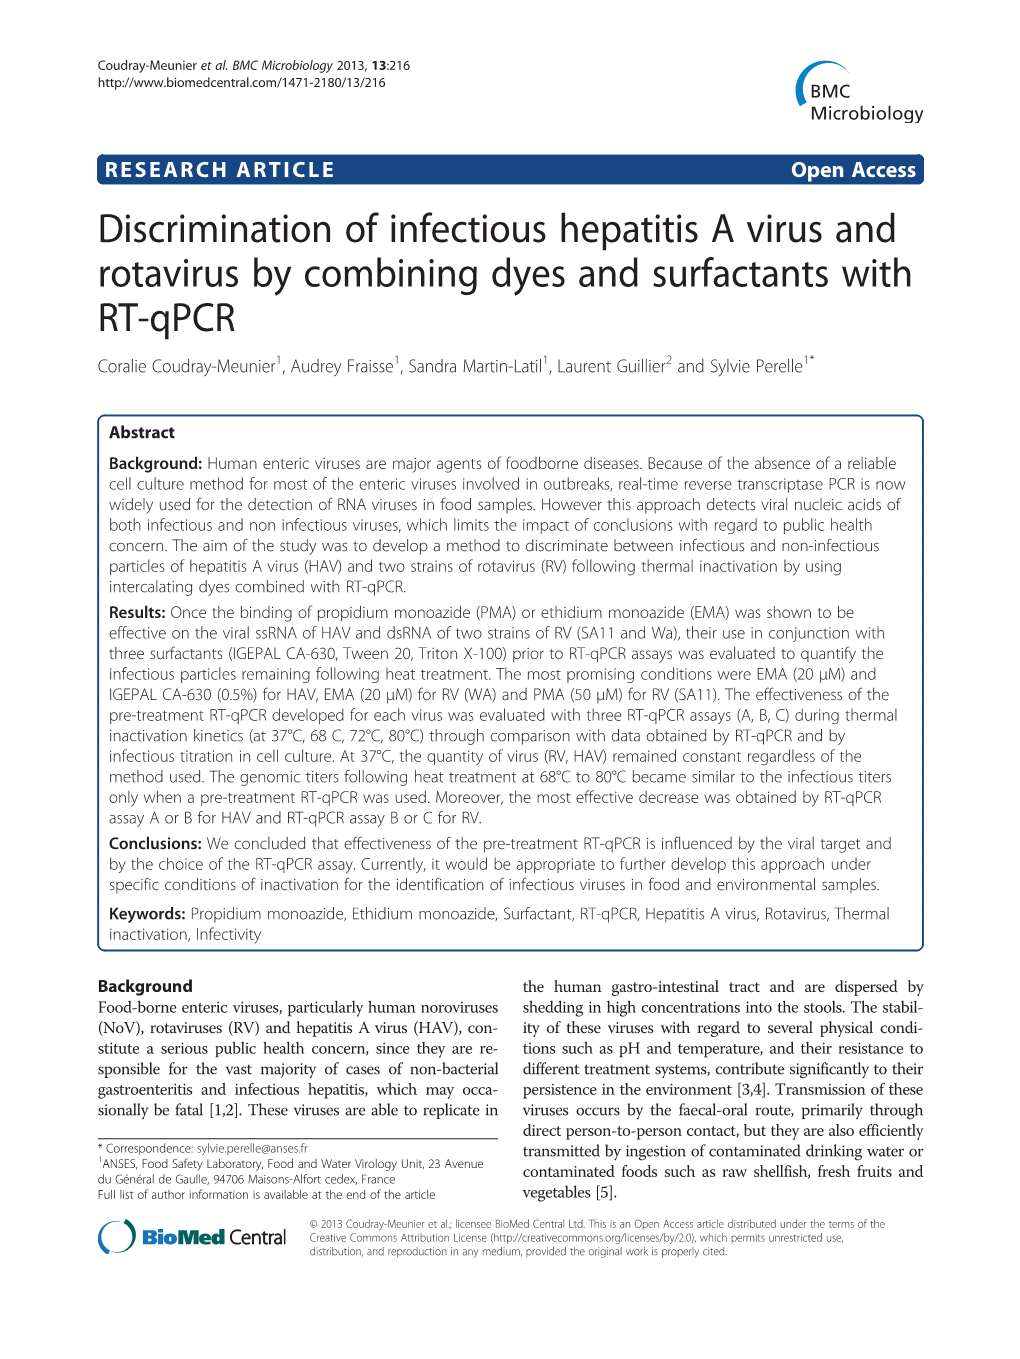 Discrimination of Infectious Hepatitis a Virus and Rotavirus by Combining